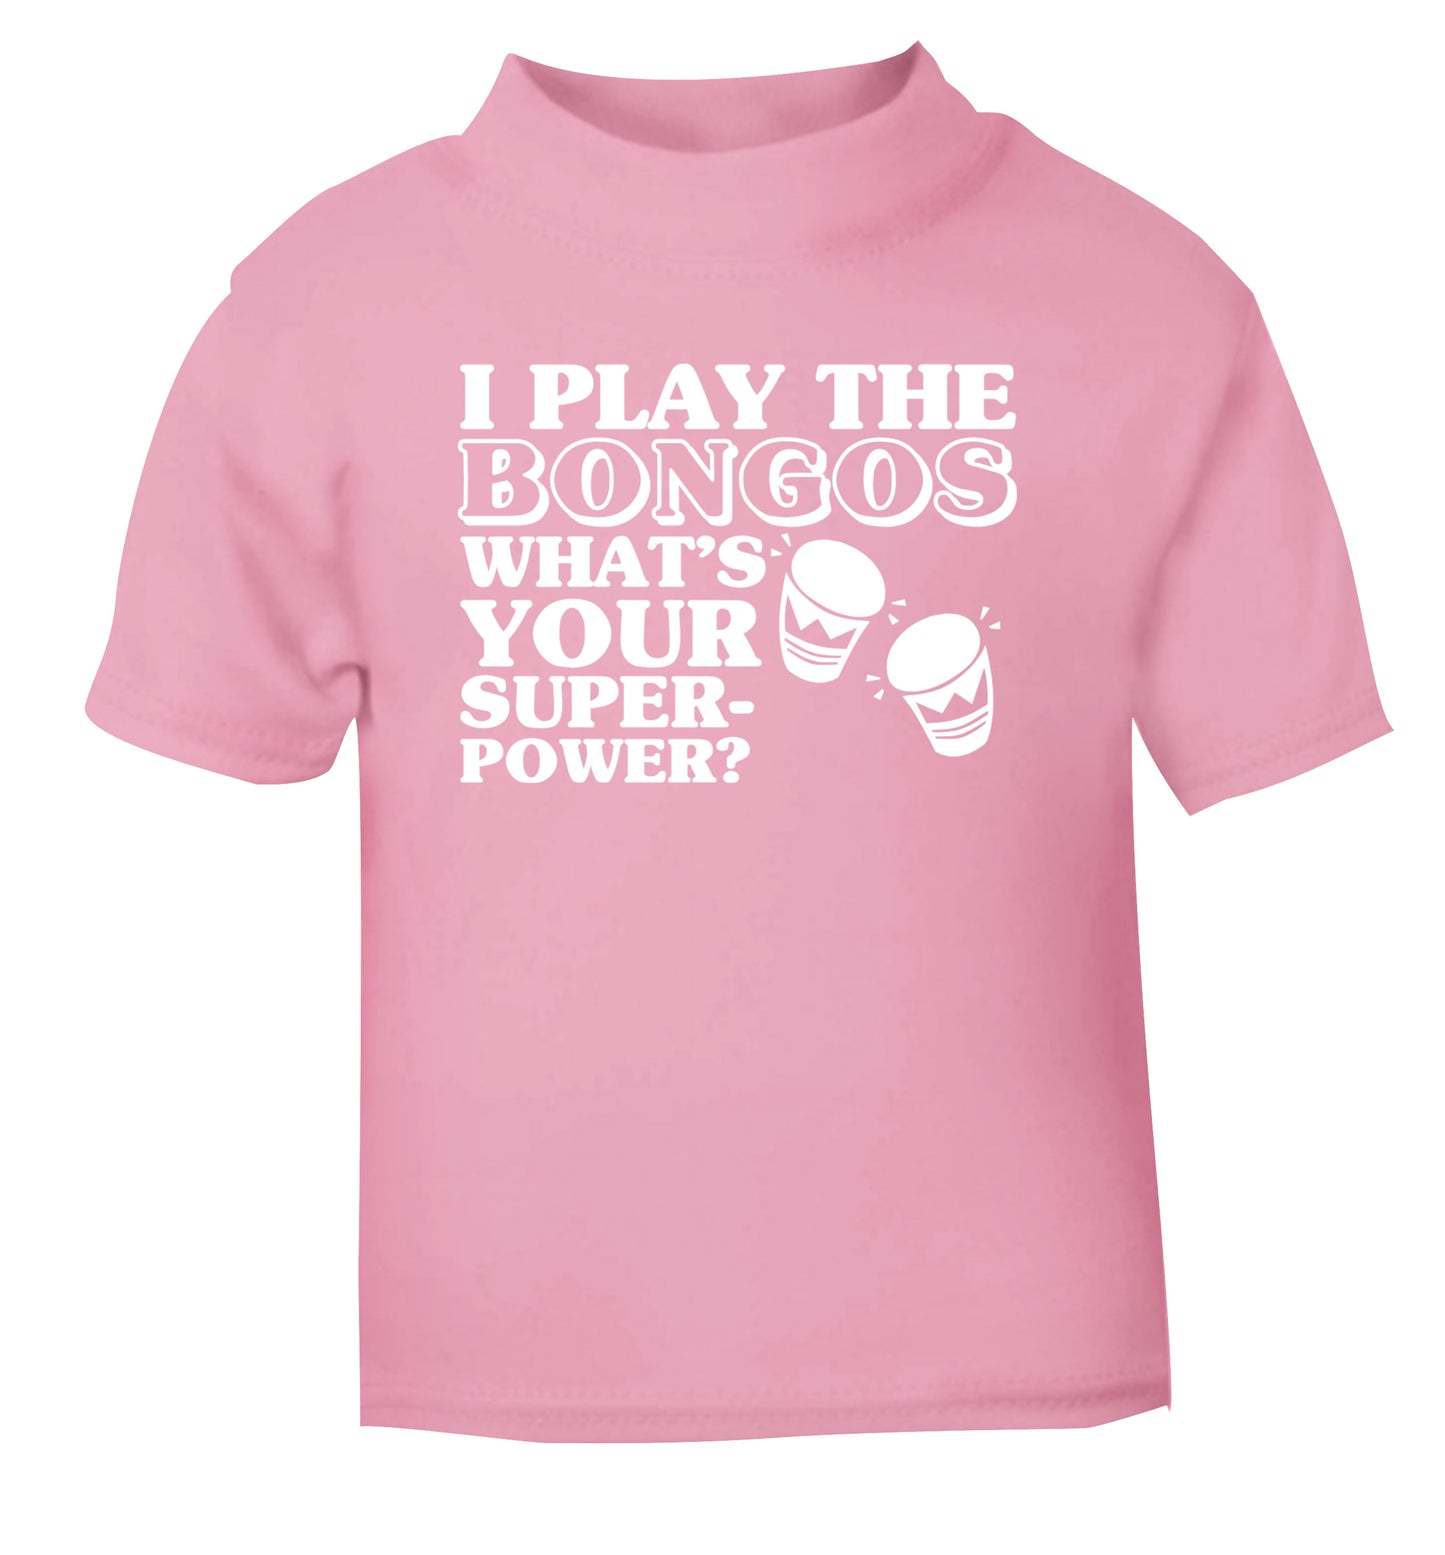 I play the bongos what's your superpower? light pink Baby Toddler Tshirt 2 Years